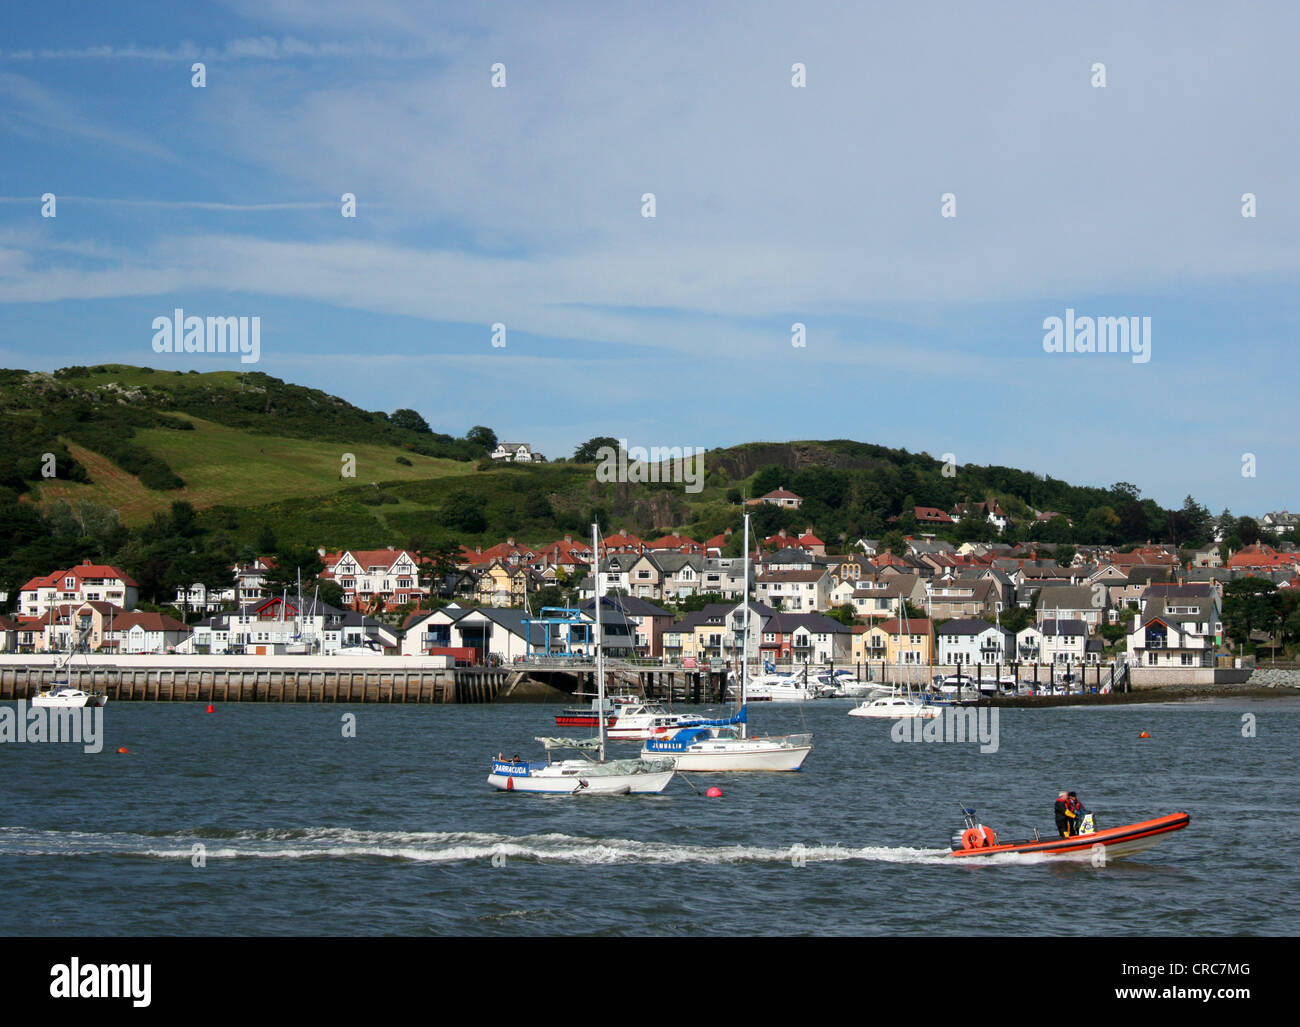 Looking across Conwy harbour to Deganwy, North Wales, Europe Stock Photo